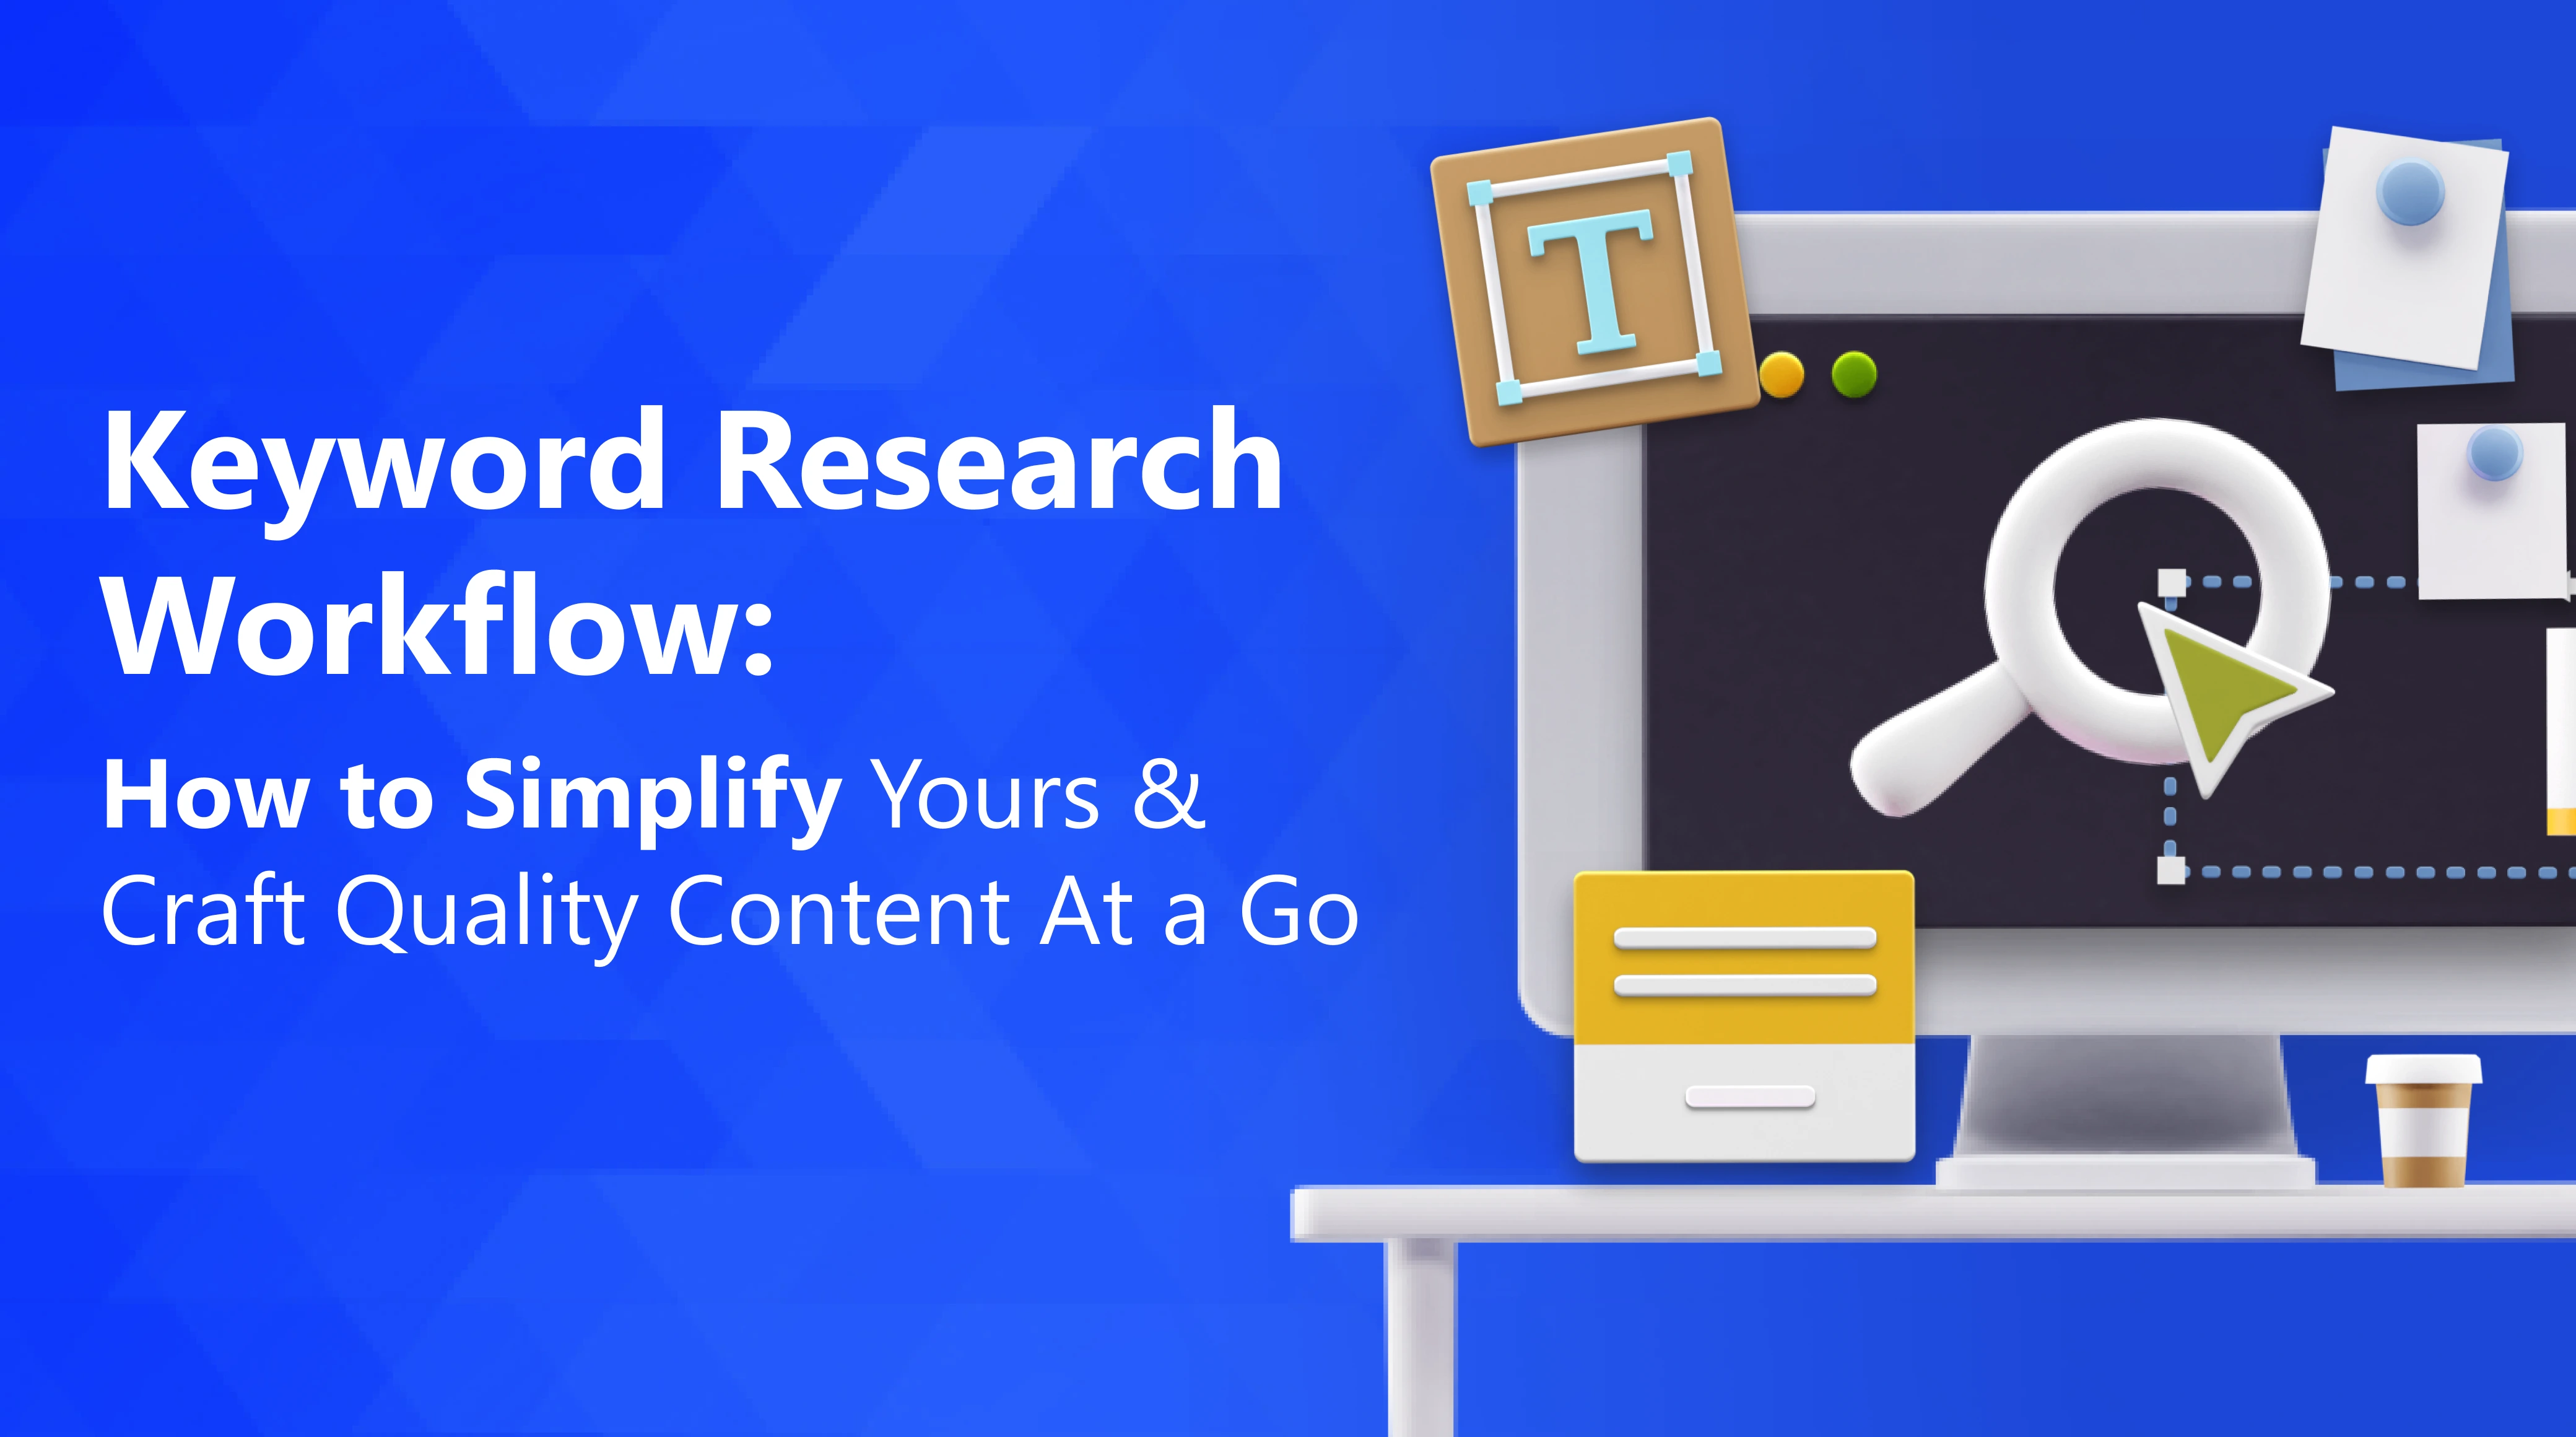 Keyword Research Workflow: How to Simplify Yours & Craft Quality Content At a Go